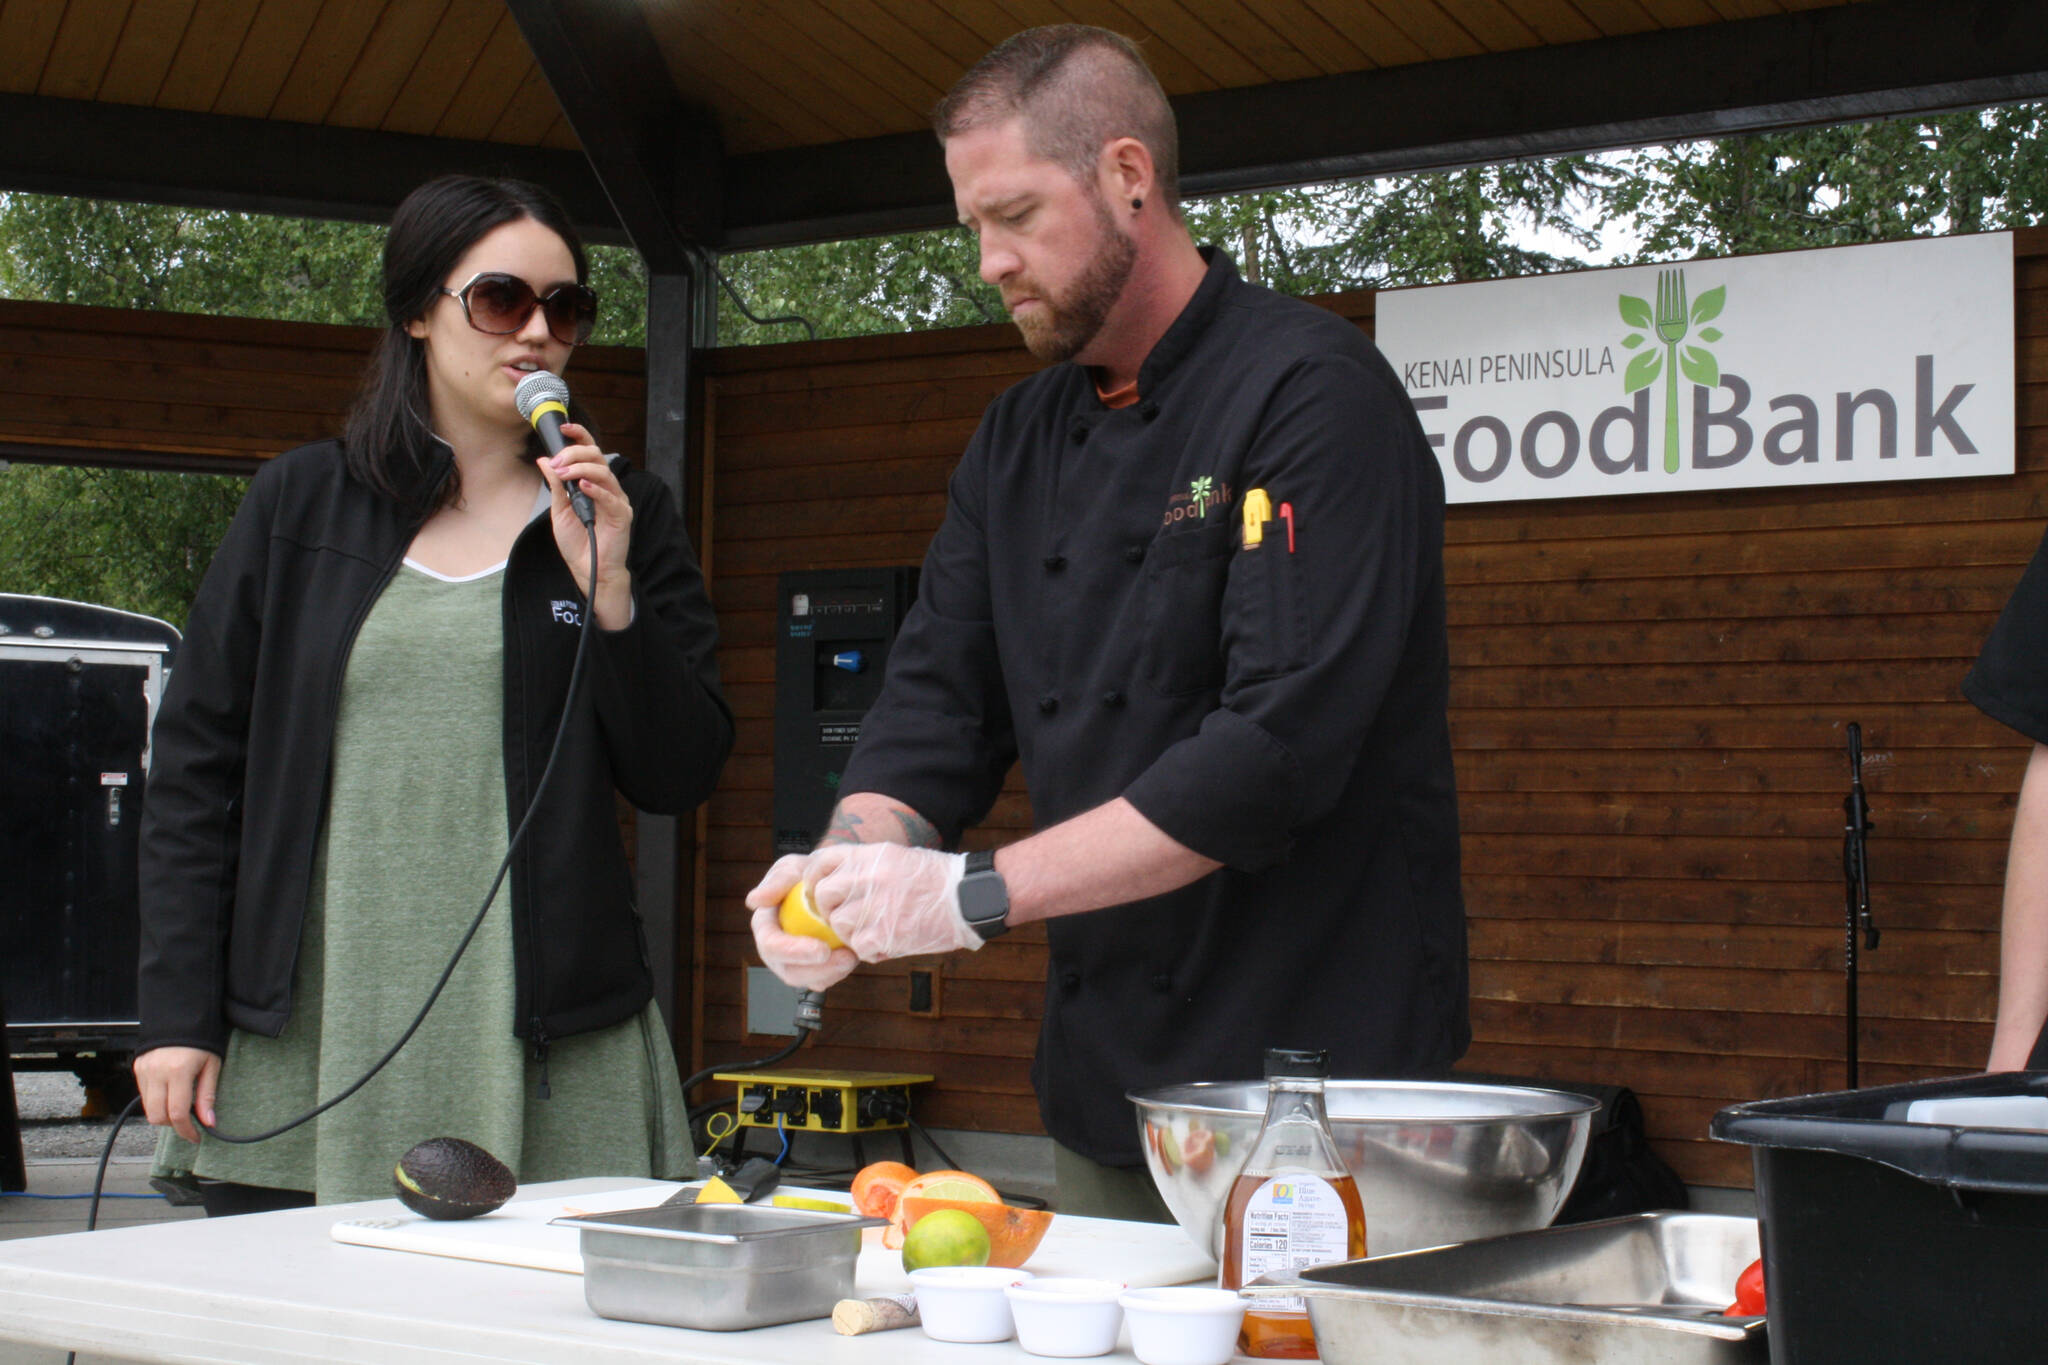 Lilly Murray, left, and Stephen Lamm from the Kenai Peninsula Food Bank give a ceviche-making demonstration at Soldotna Creek Park on Thursday, July 21, 2022. (Camille Botello/Peninsula Clarion)